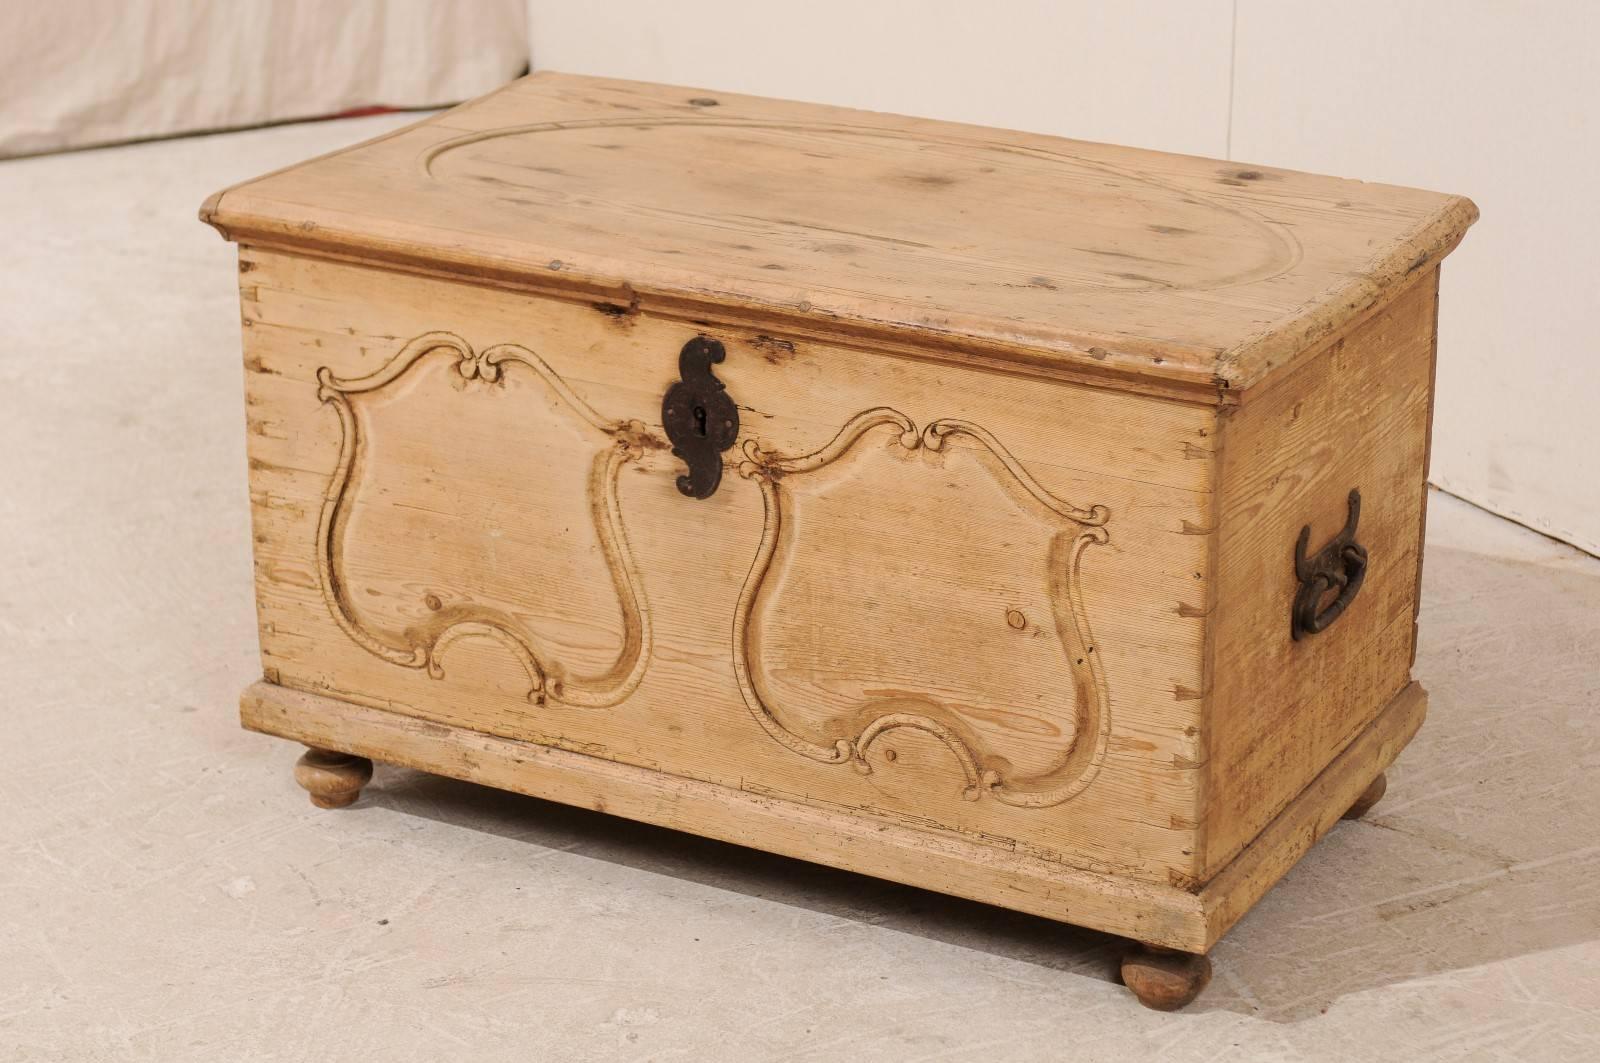 Swedish 19th Century Pine Wood Coffer or Trunk with Shield-Like Carvings on the Front